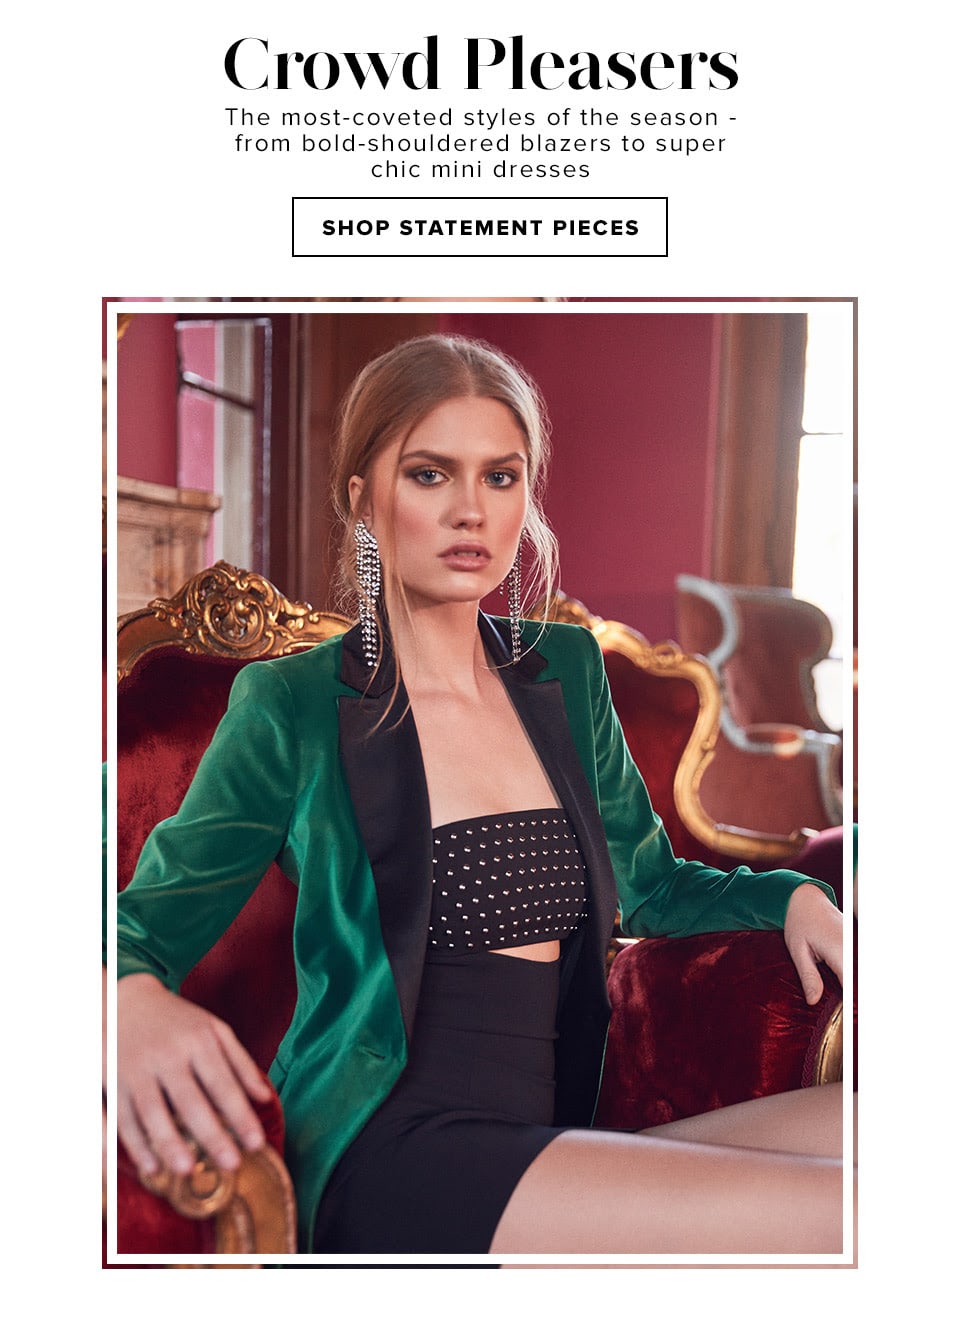 CROWD PLEASERS. The most-coveted styles of the season - from bold-shouldered blazers to super chic mini dresses. SHOP STATEMENT PIECES.